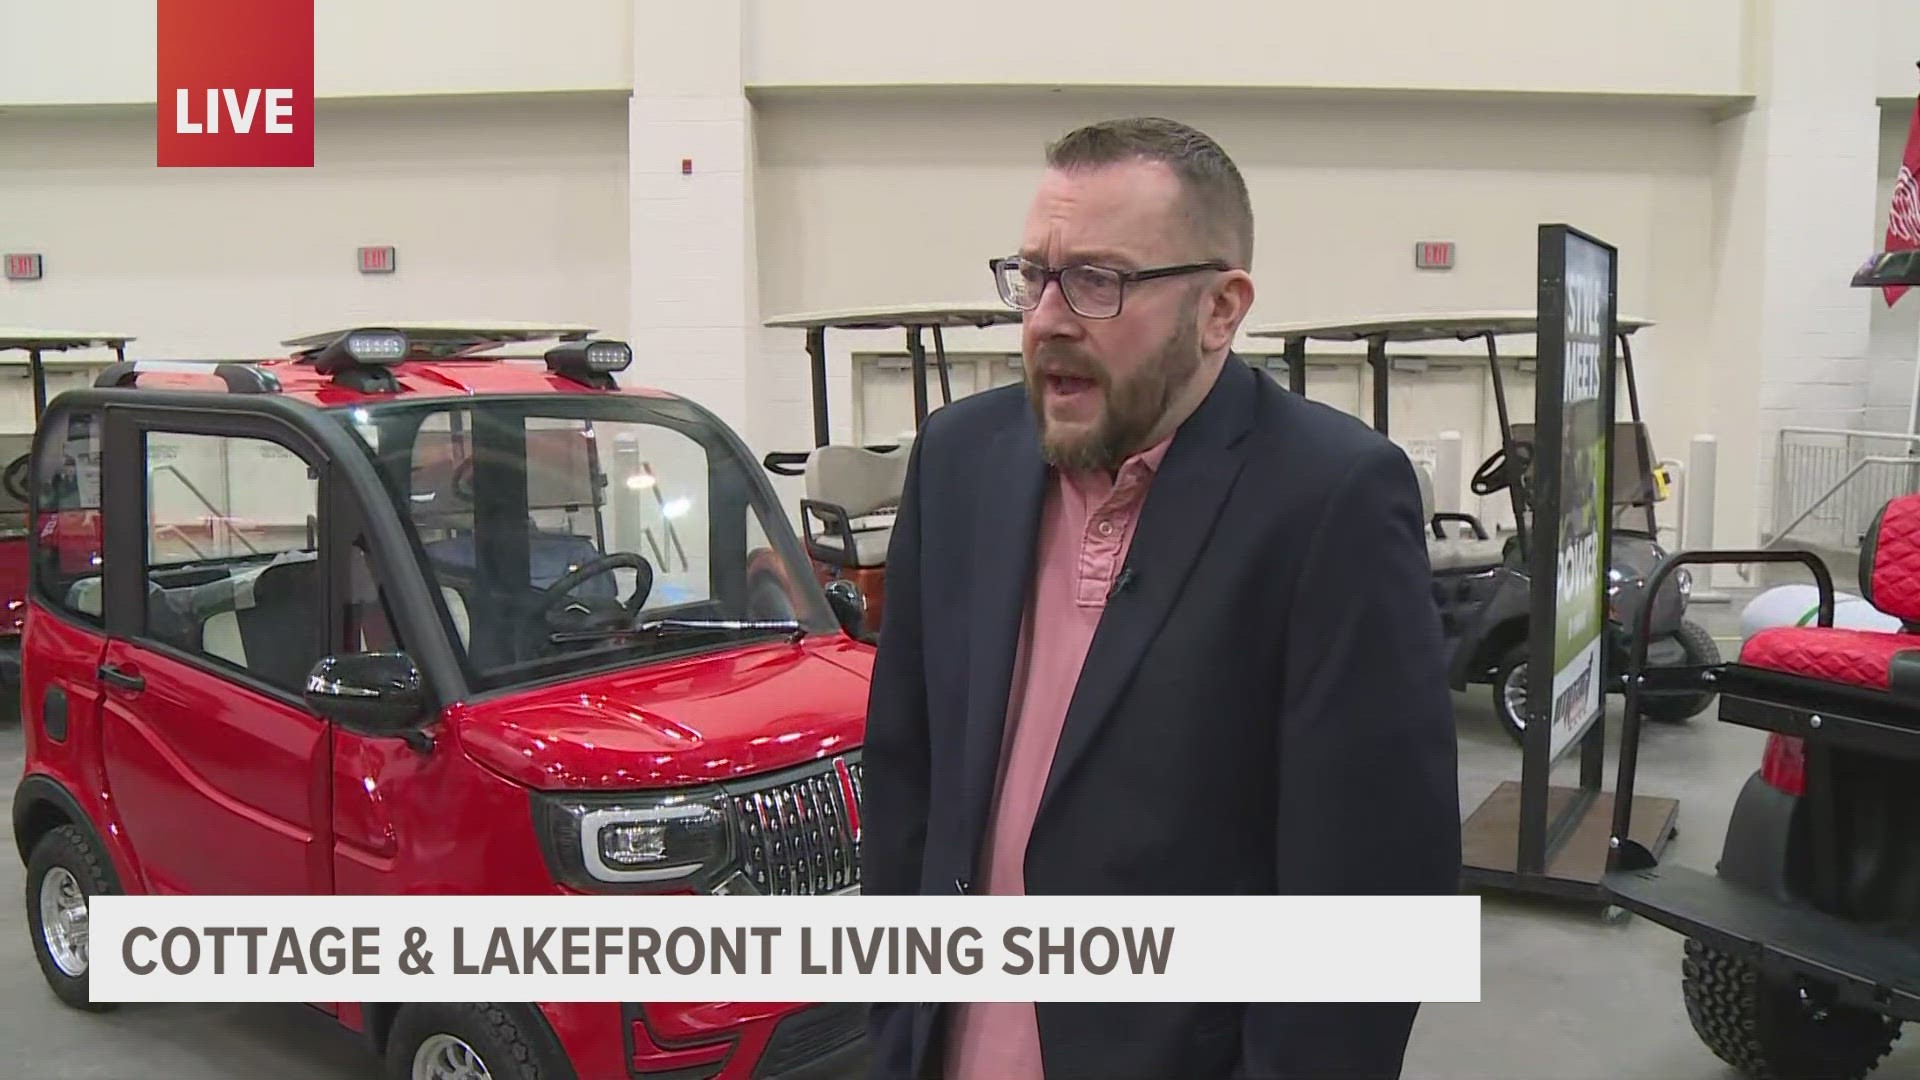 You can find everything from electric golf carts to coolers that run on solar panels at the Cottage and Lakefront Living Show.